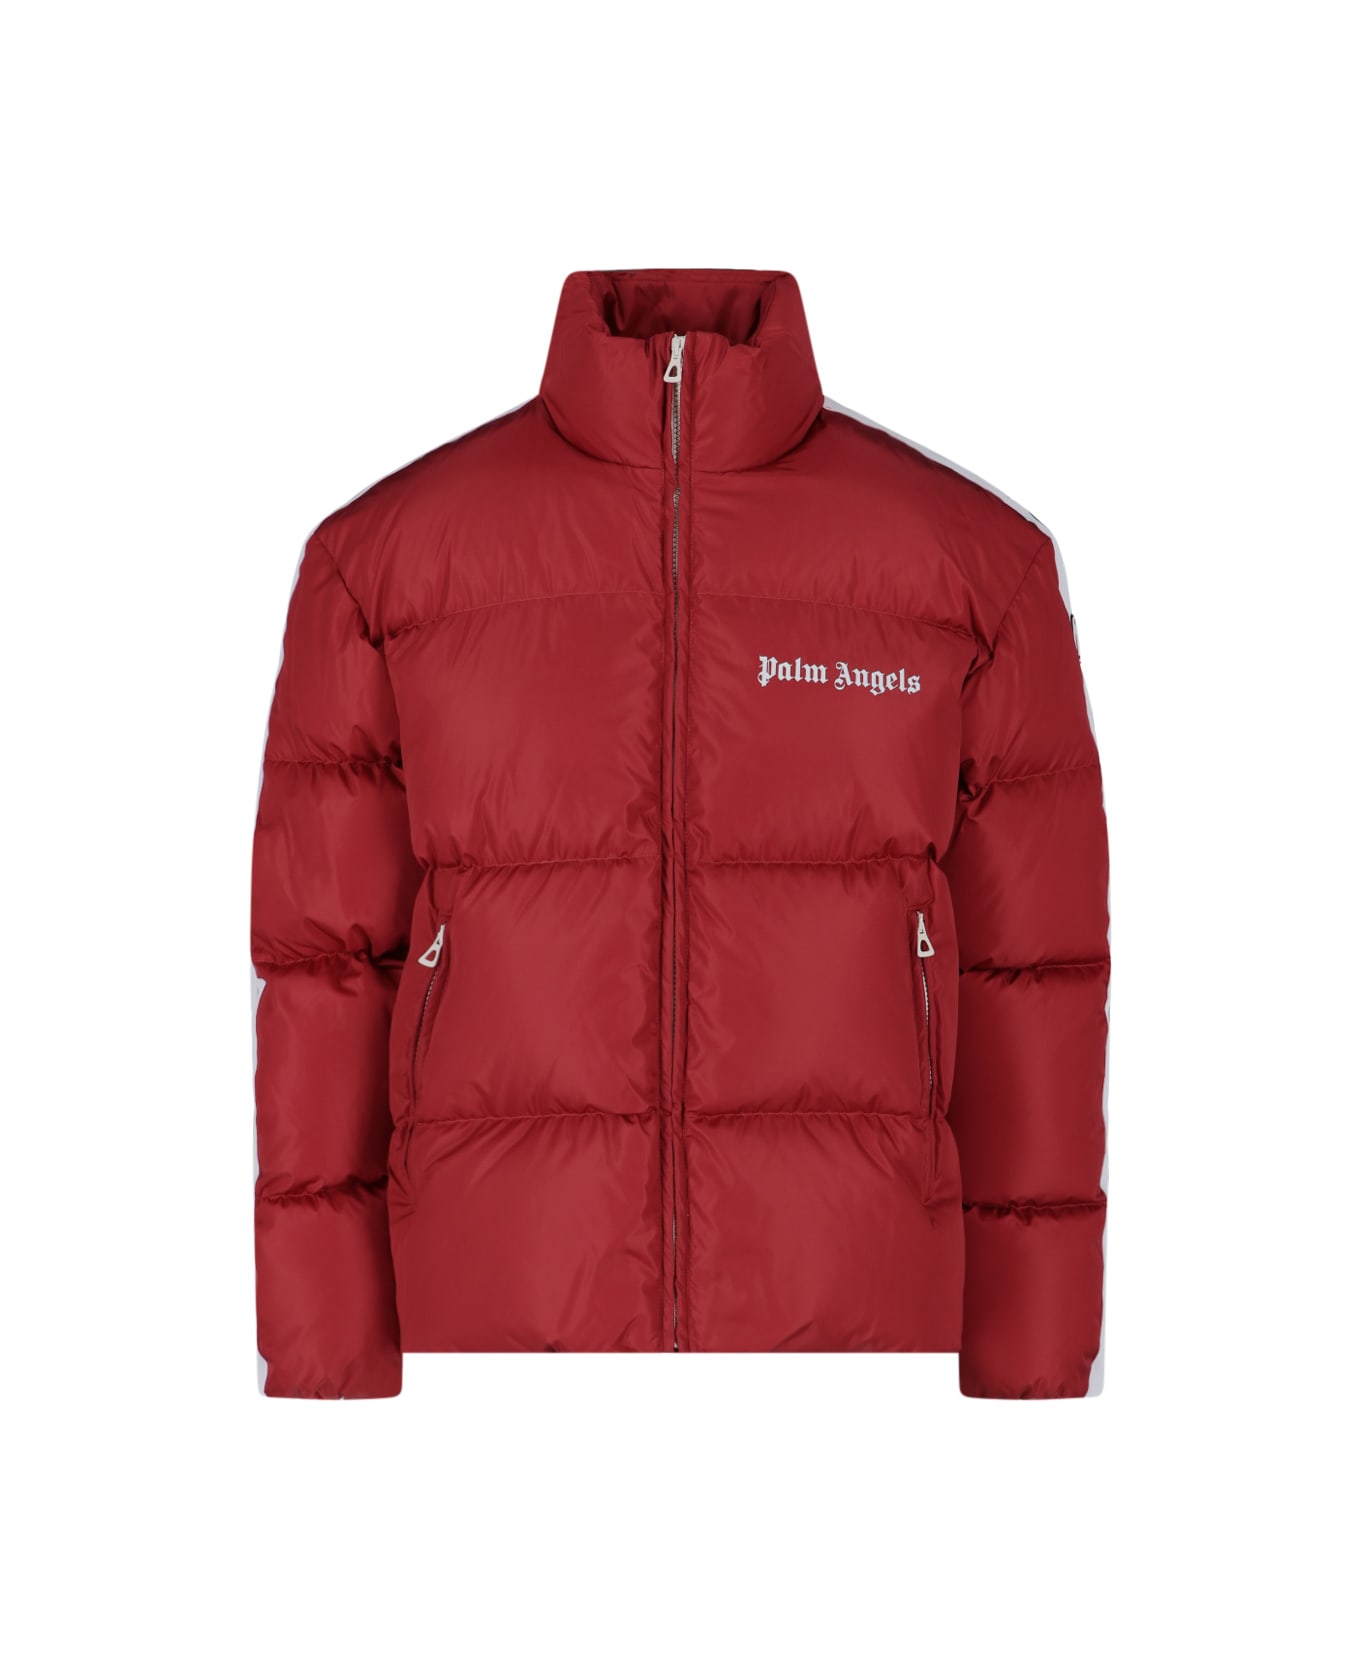 Palm Angels Jacket - Red